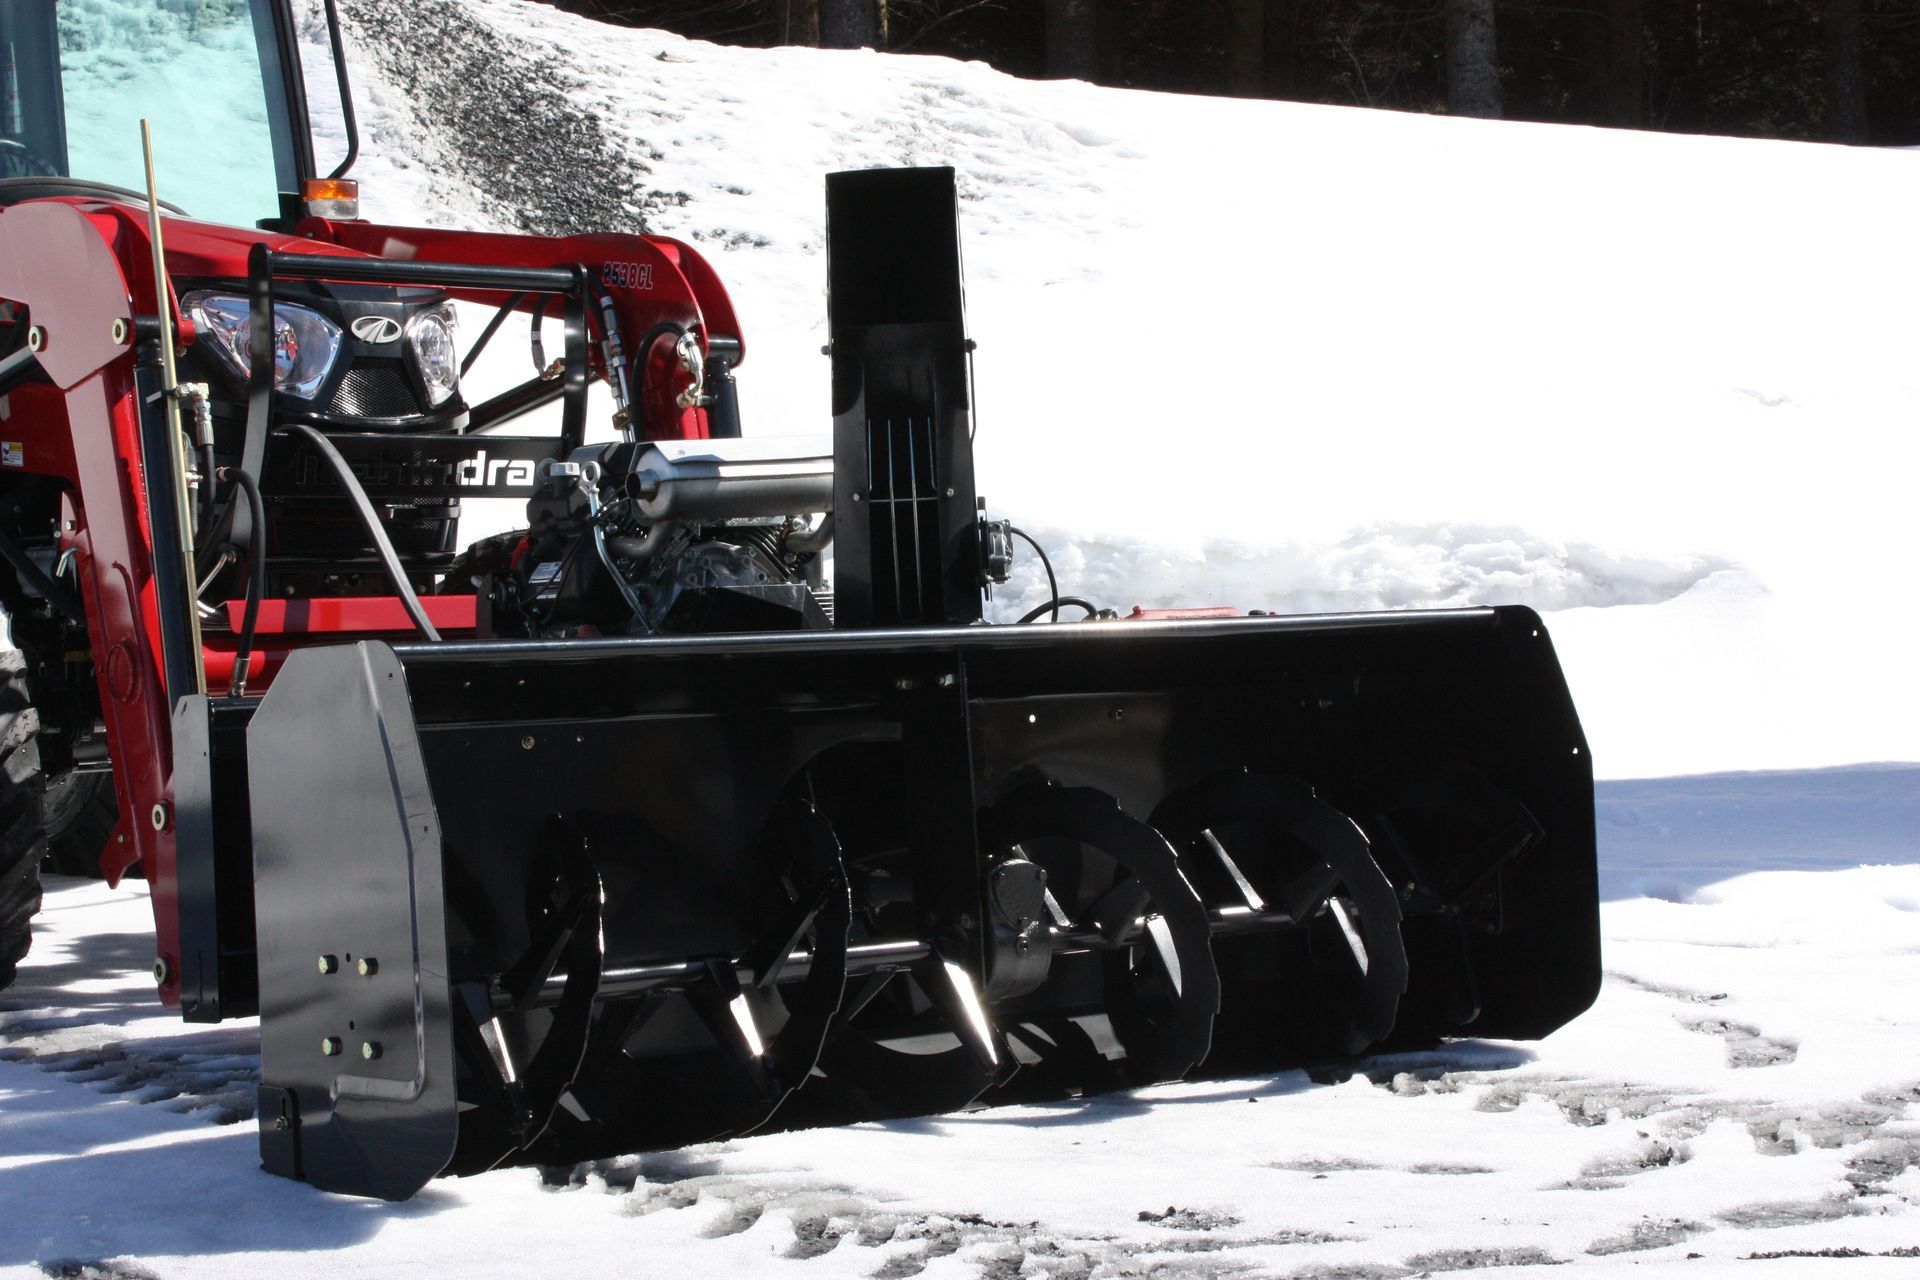 66″ VANTAGE SNOWBLOWER FOR TRACTORS EQUIPPED WITH 